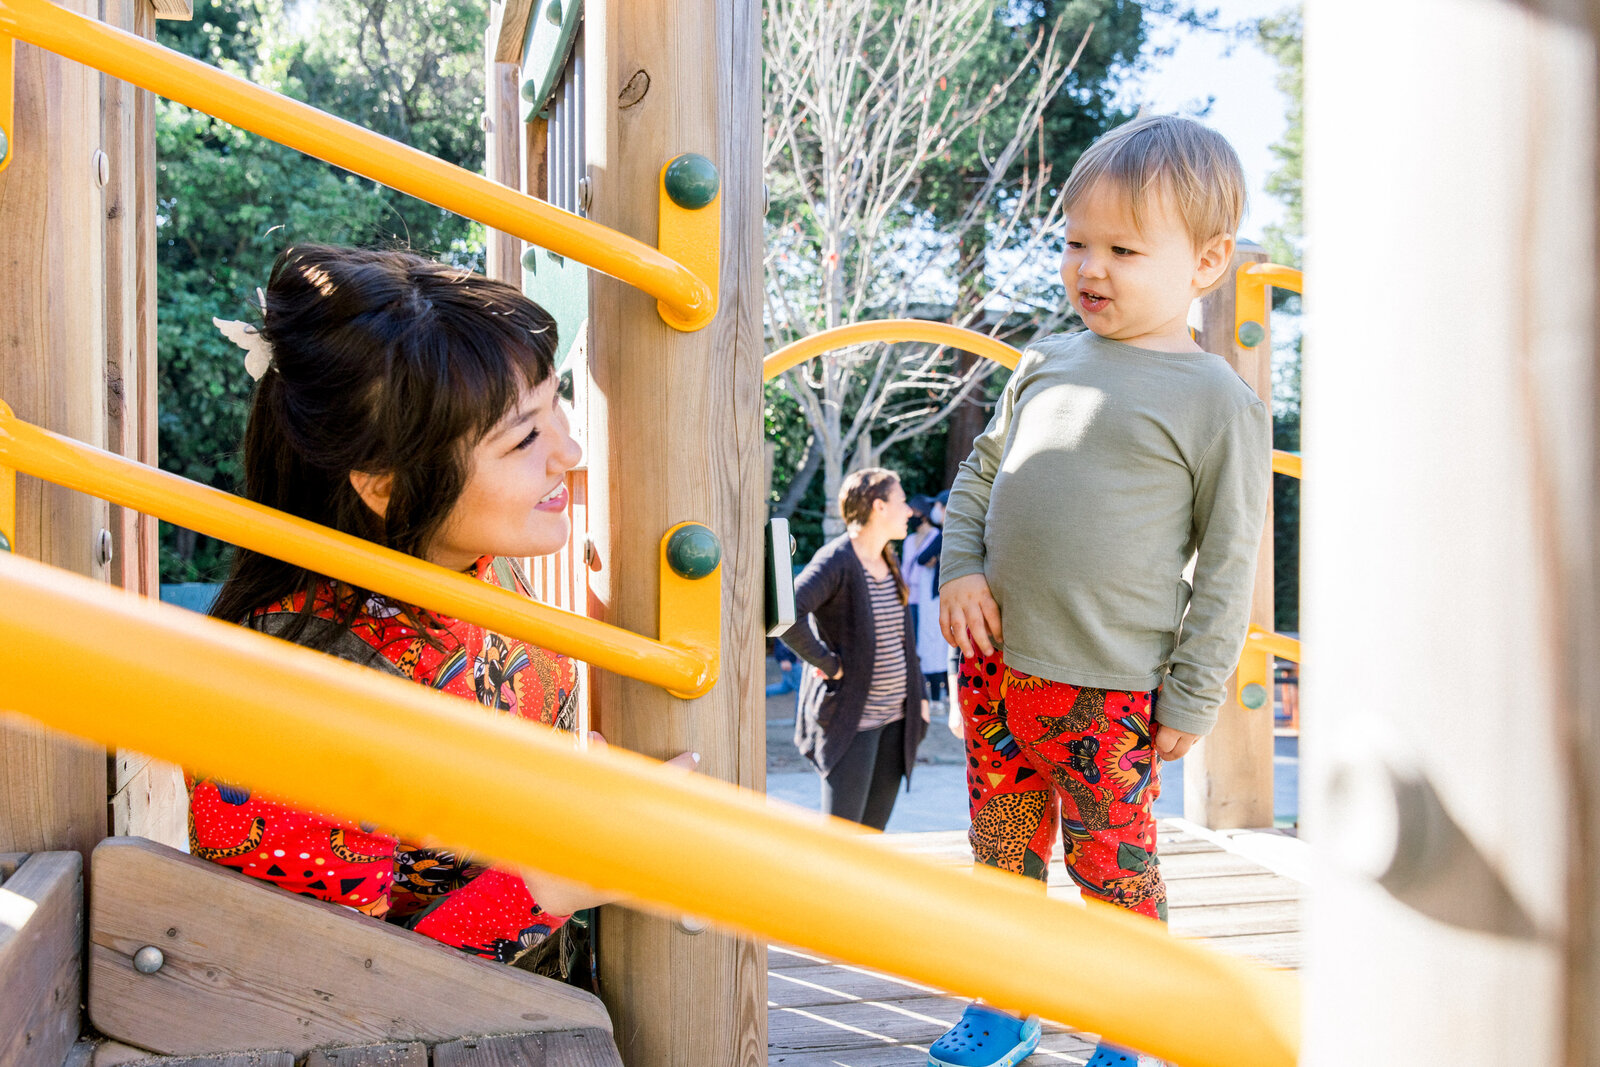 Asian mom playing peekaboo with toddler son at a playground in berkeley california